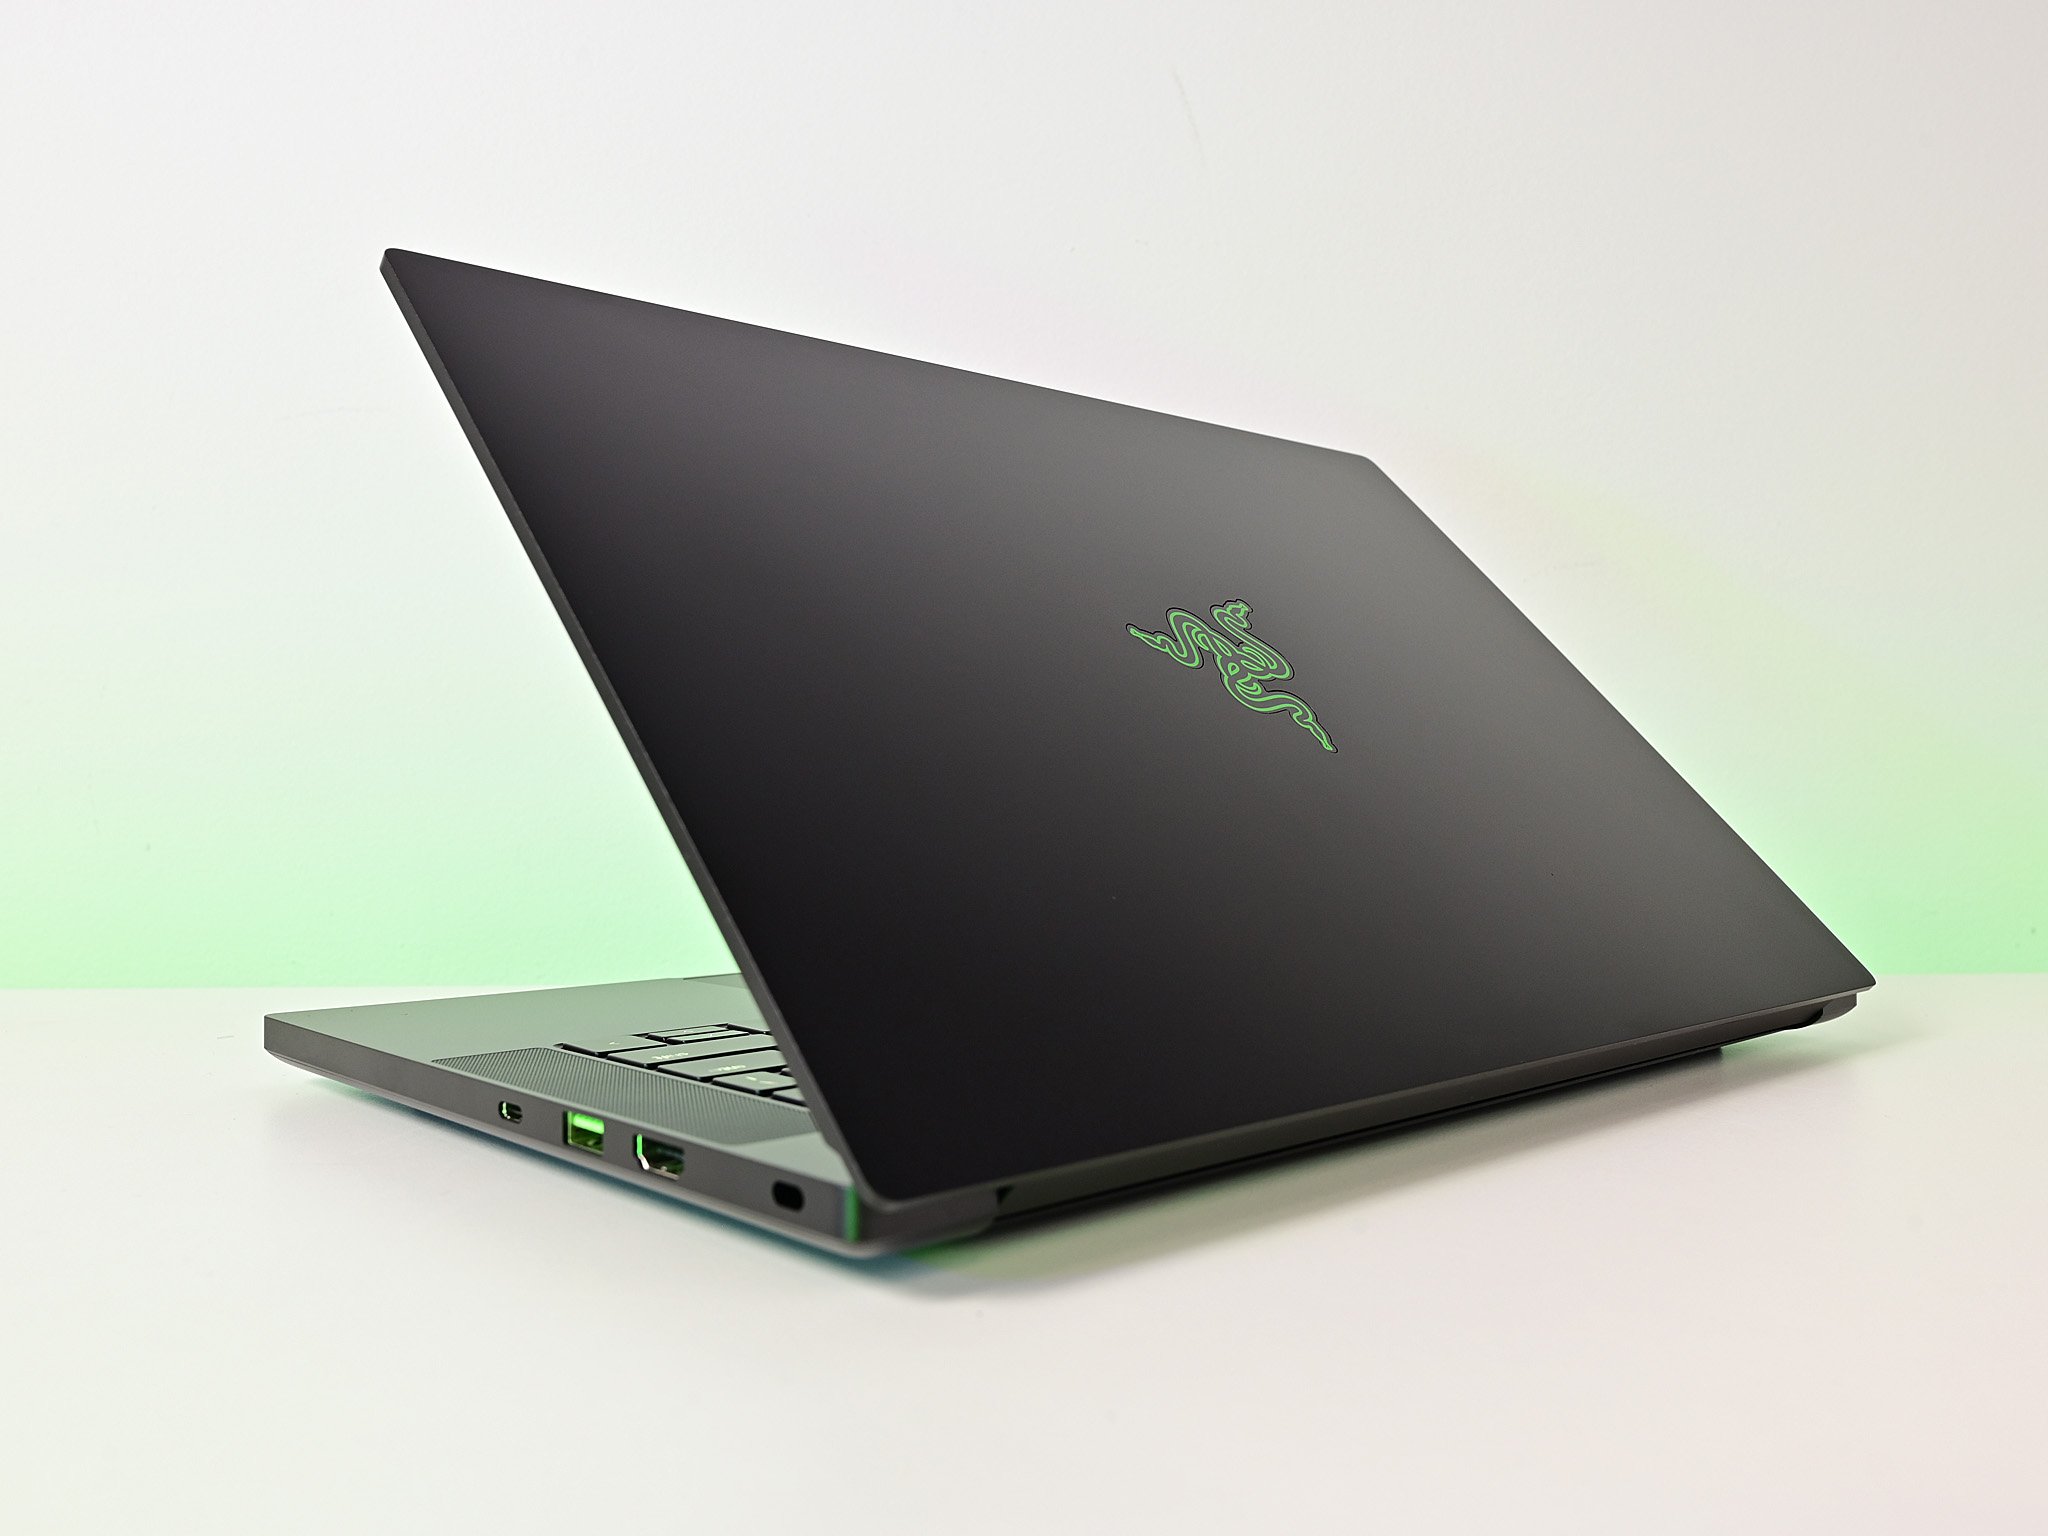 Razer Blade 14 review: Razer's first AMD gaming laptop is insanely powerful  with some quirks